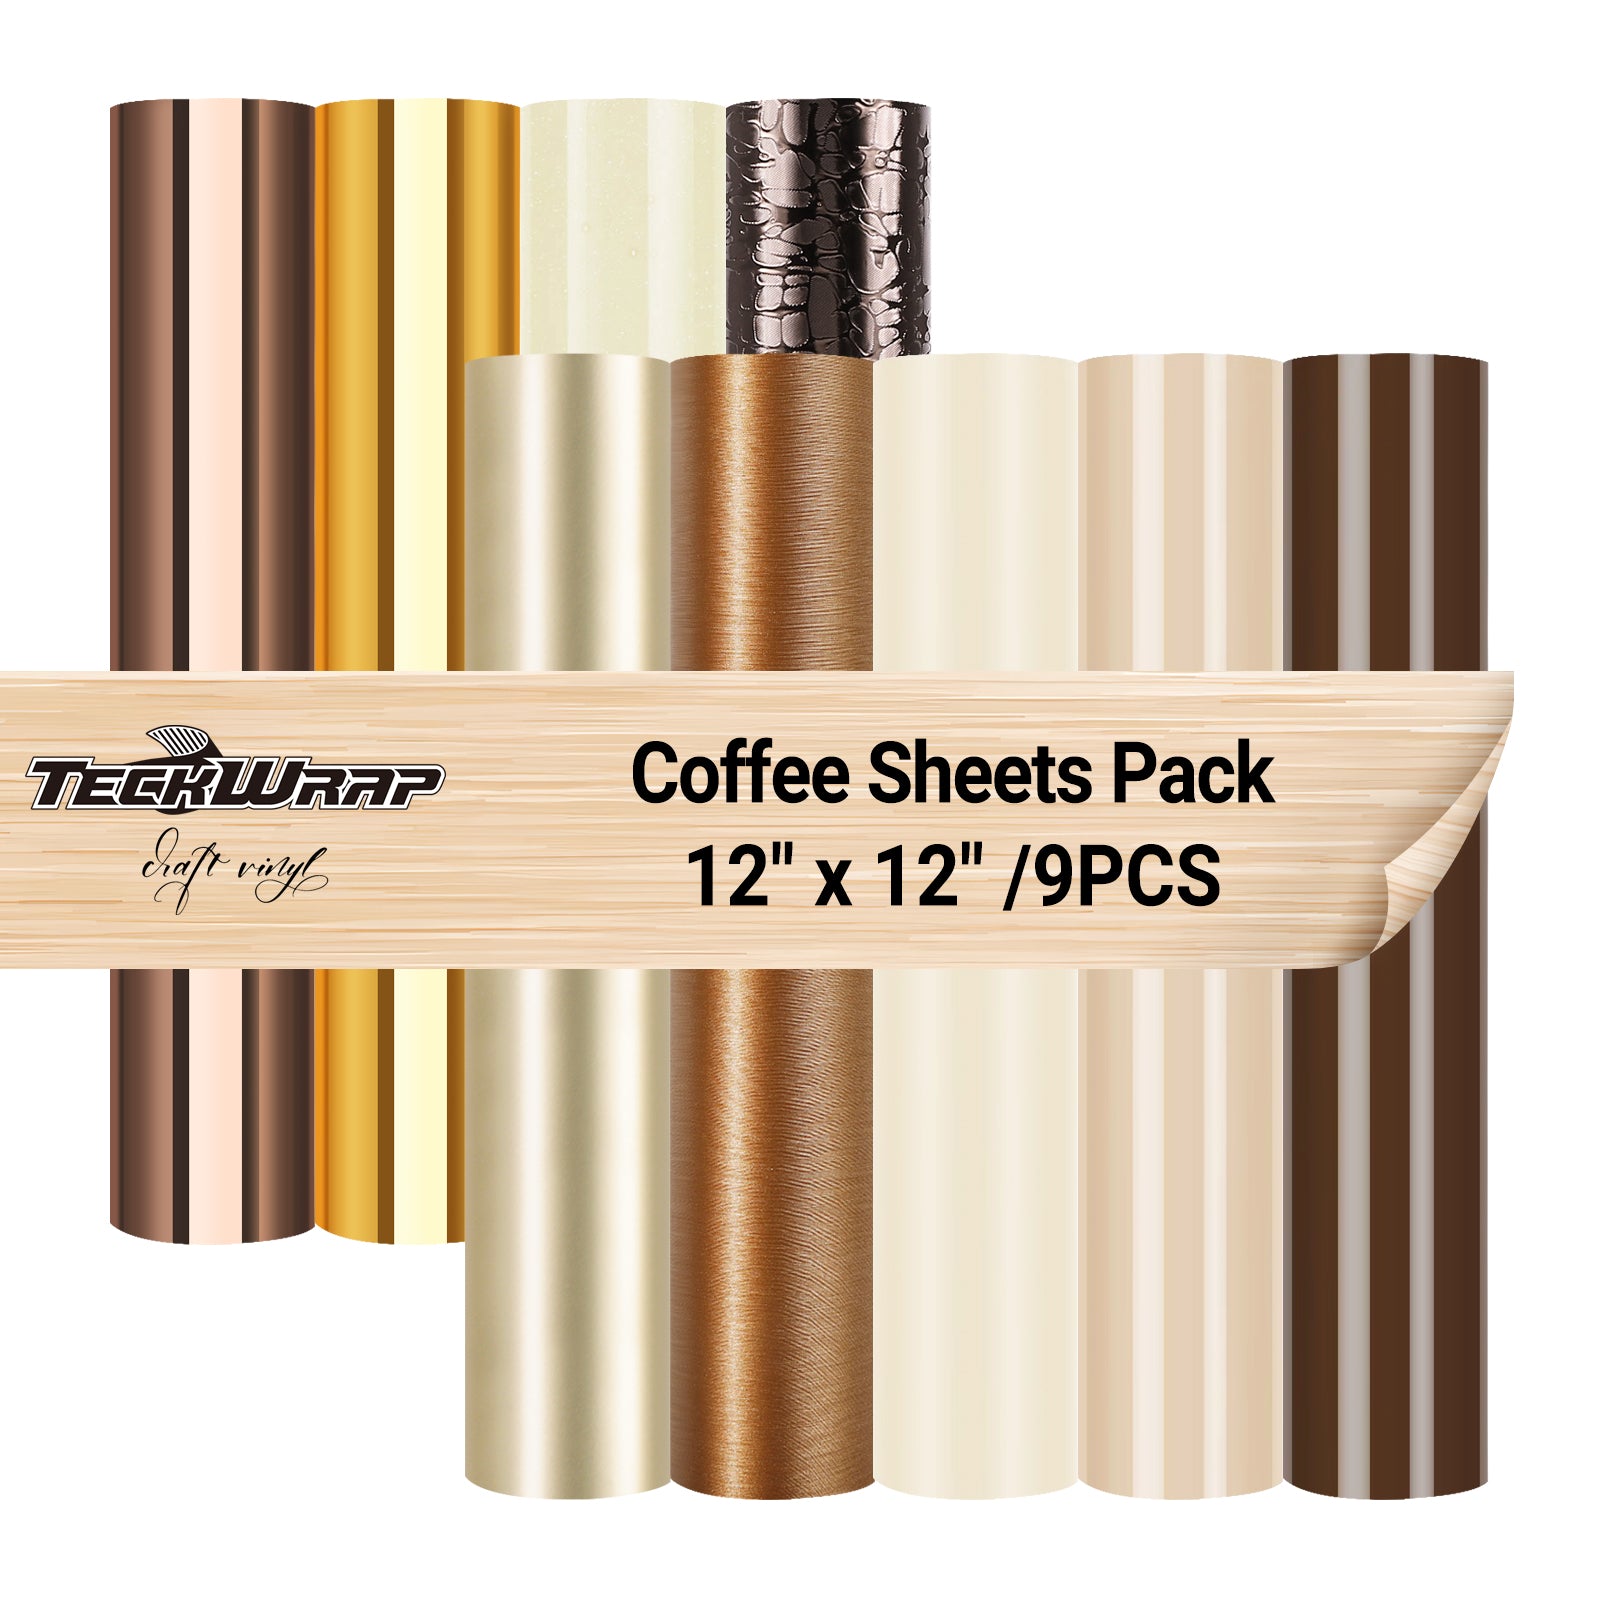 Coffee Sheets Pack, Adhesive Craft Vinyl Coffee Sheets Pack